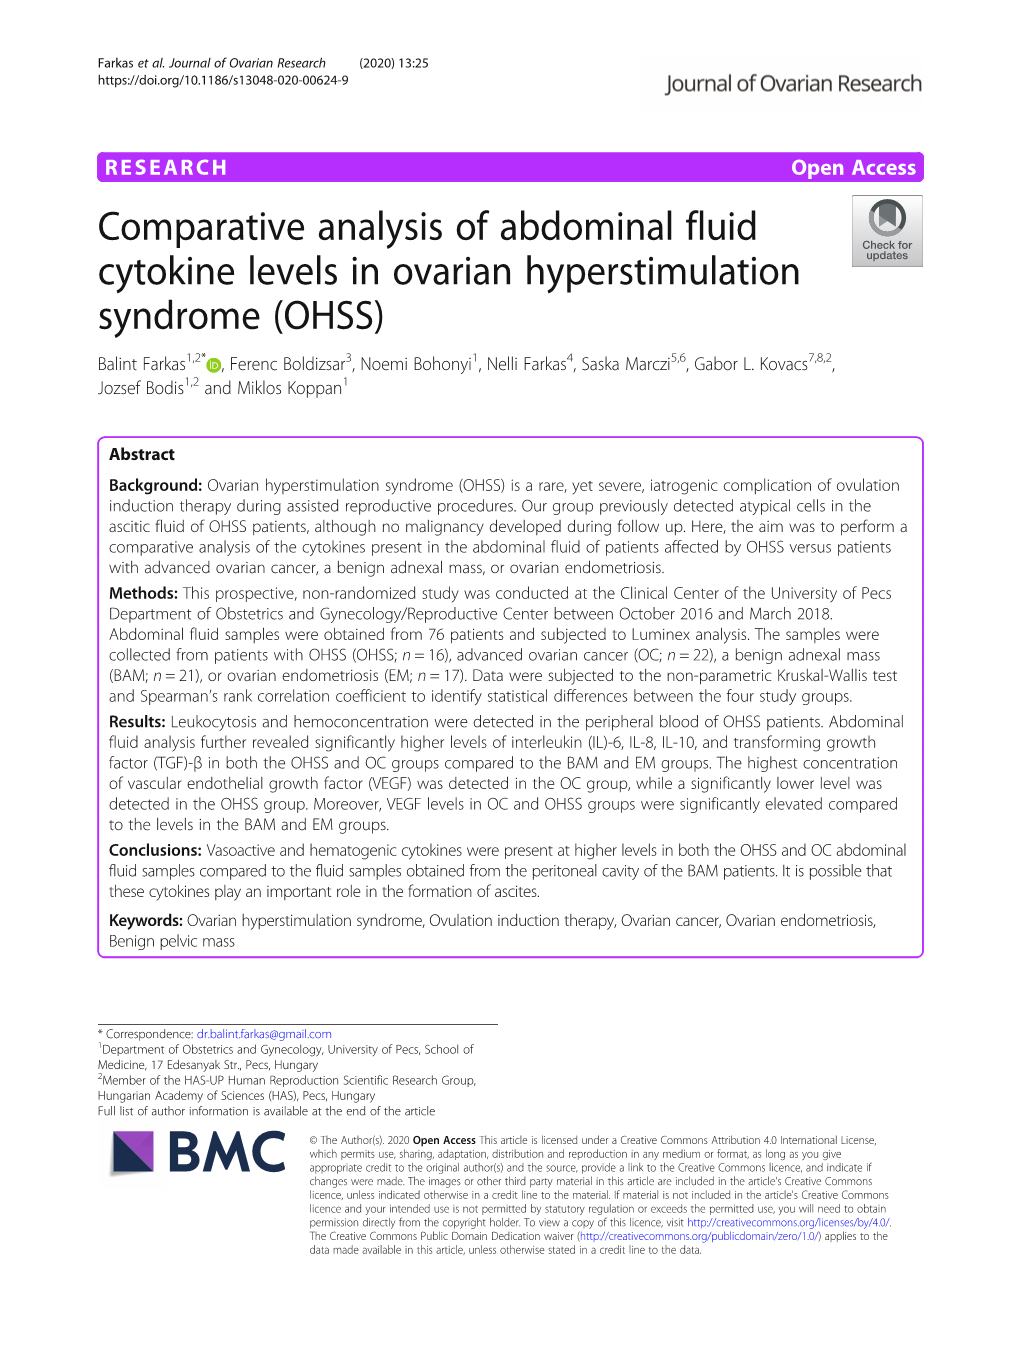 Comparative Analysis of Abdominal Fluid Cytokine Levels in Ovarian